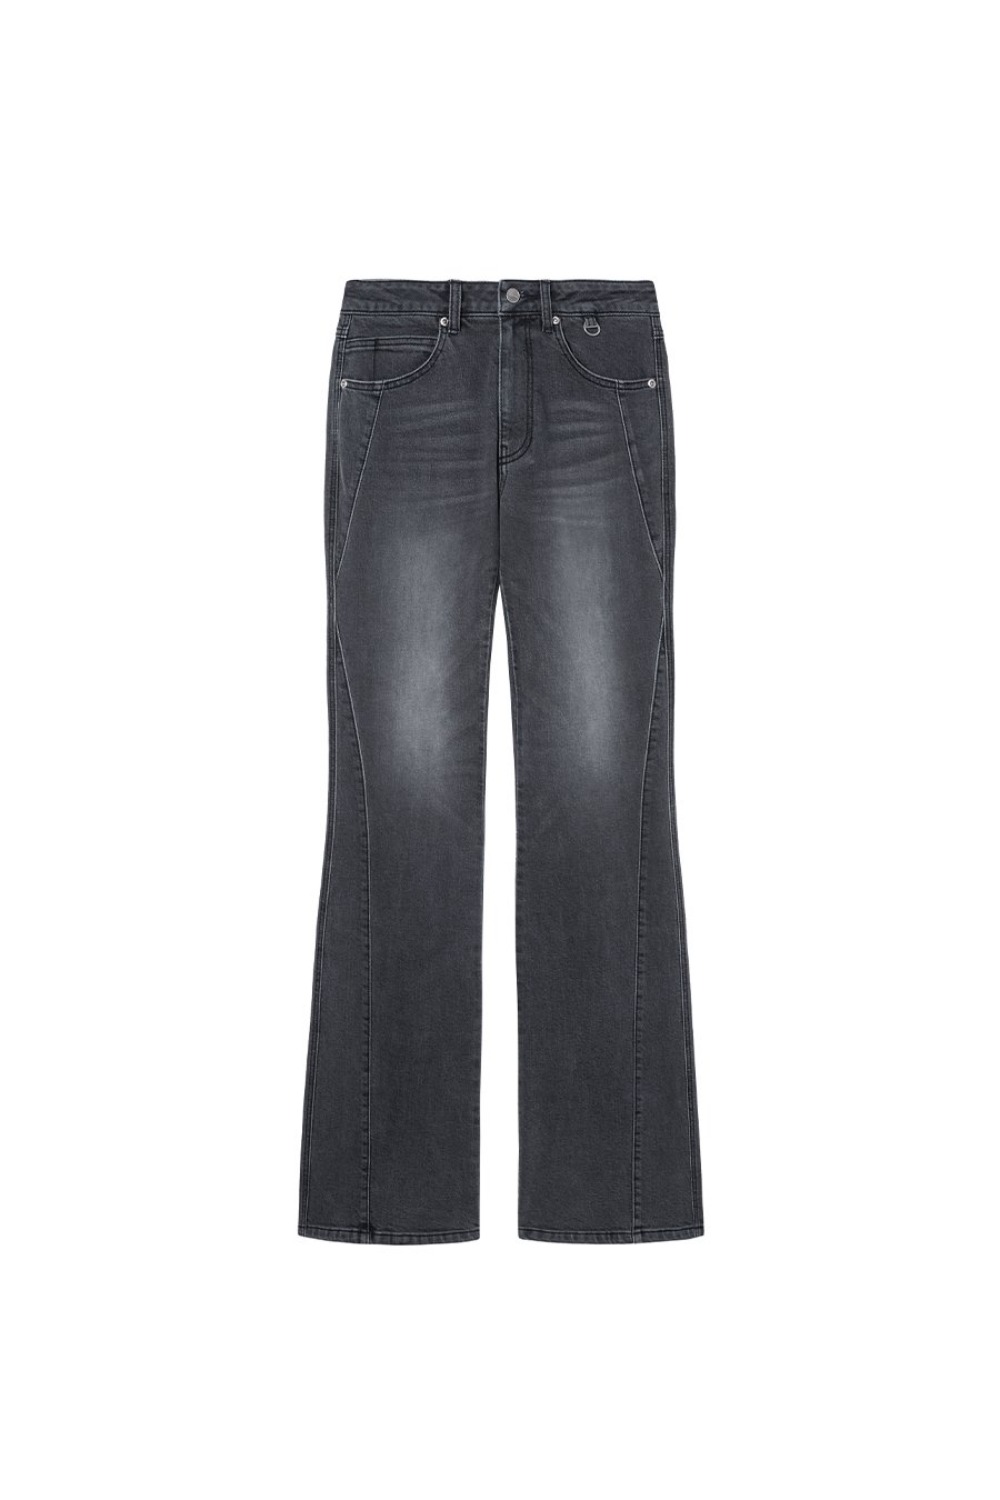 DIVIDED BOOTCUT JEANS DARK GRAY